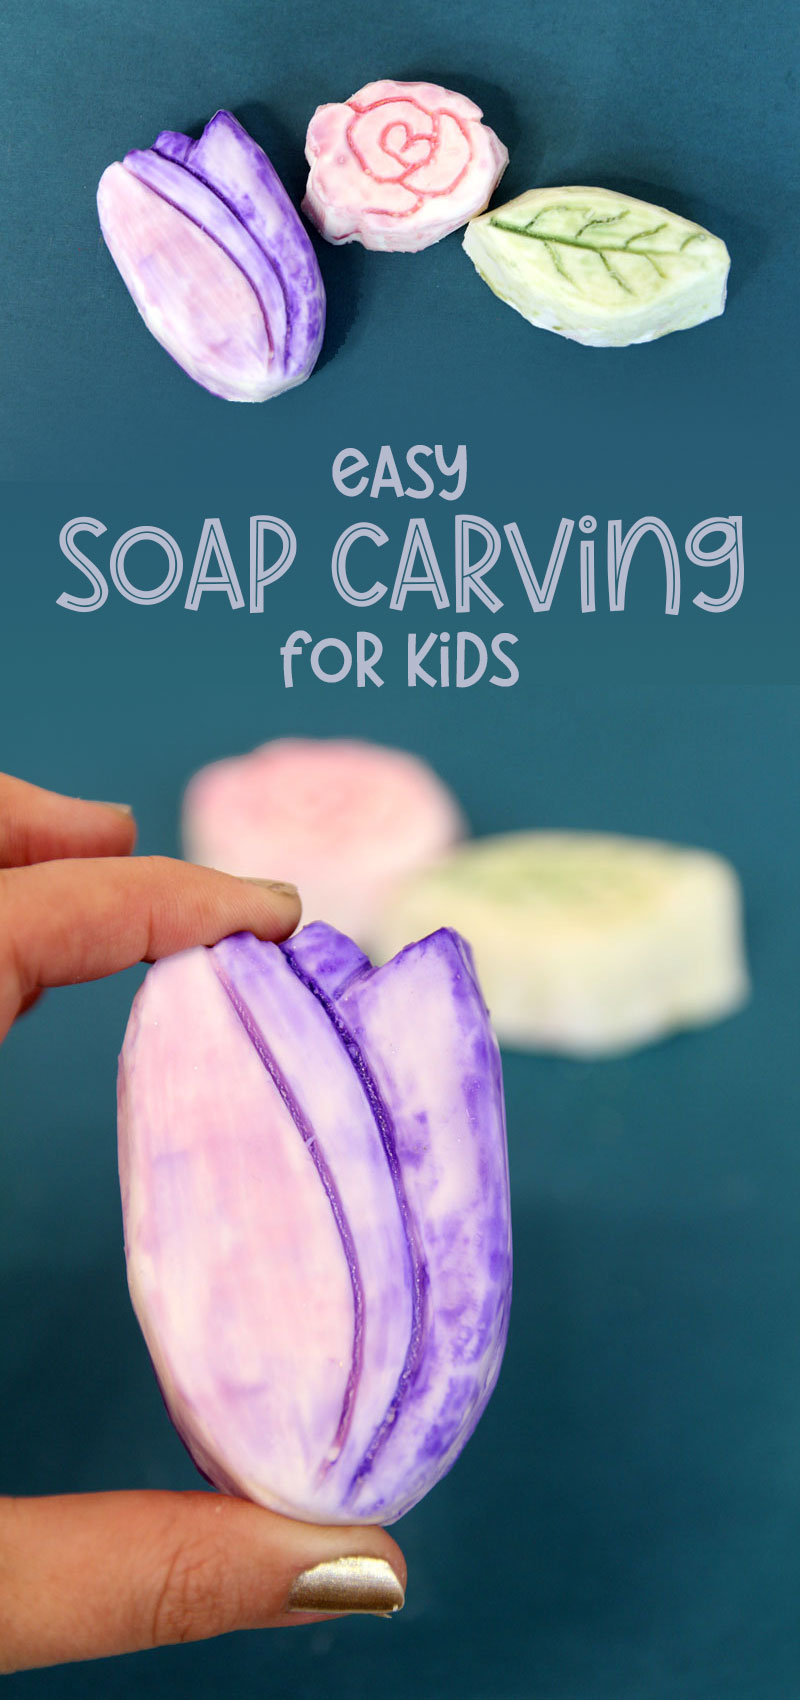 soap carving for kids dark teal collage